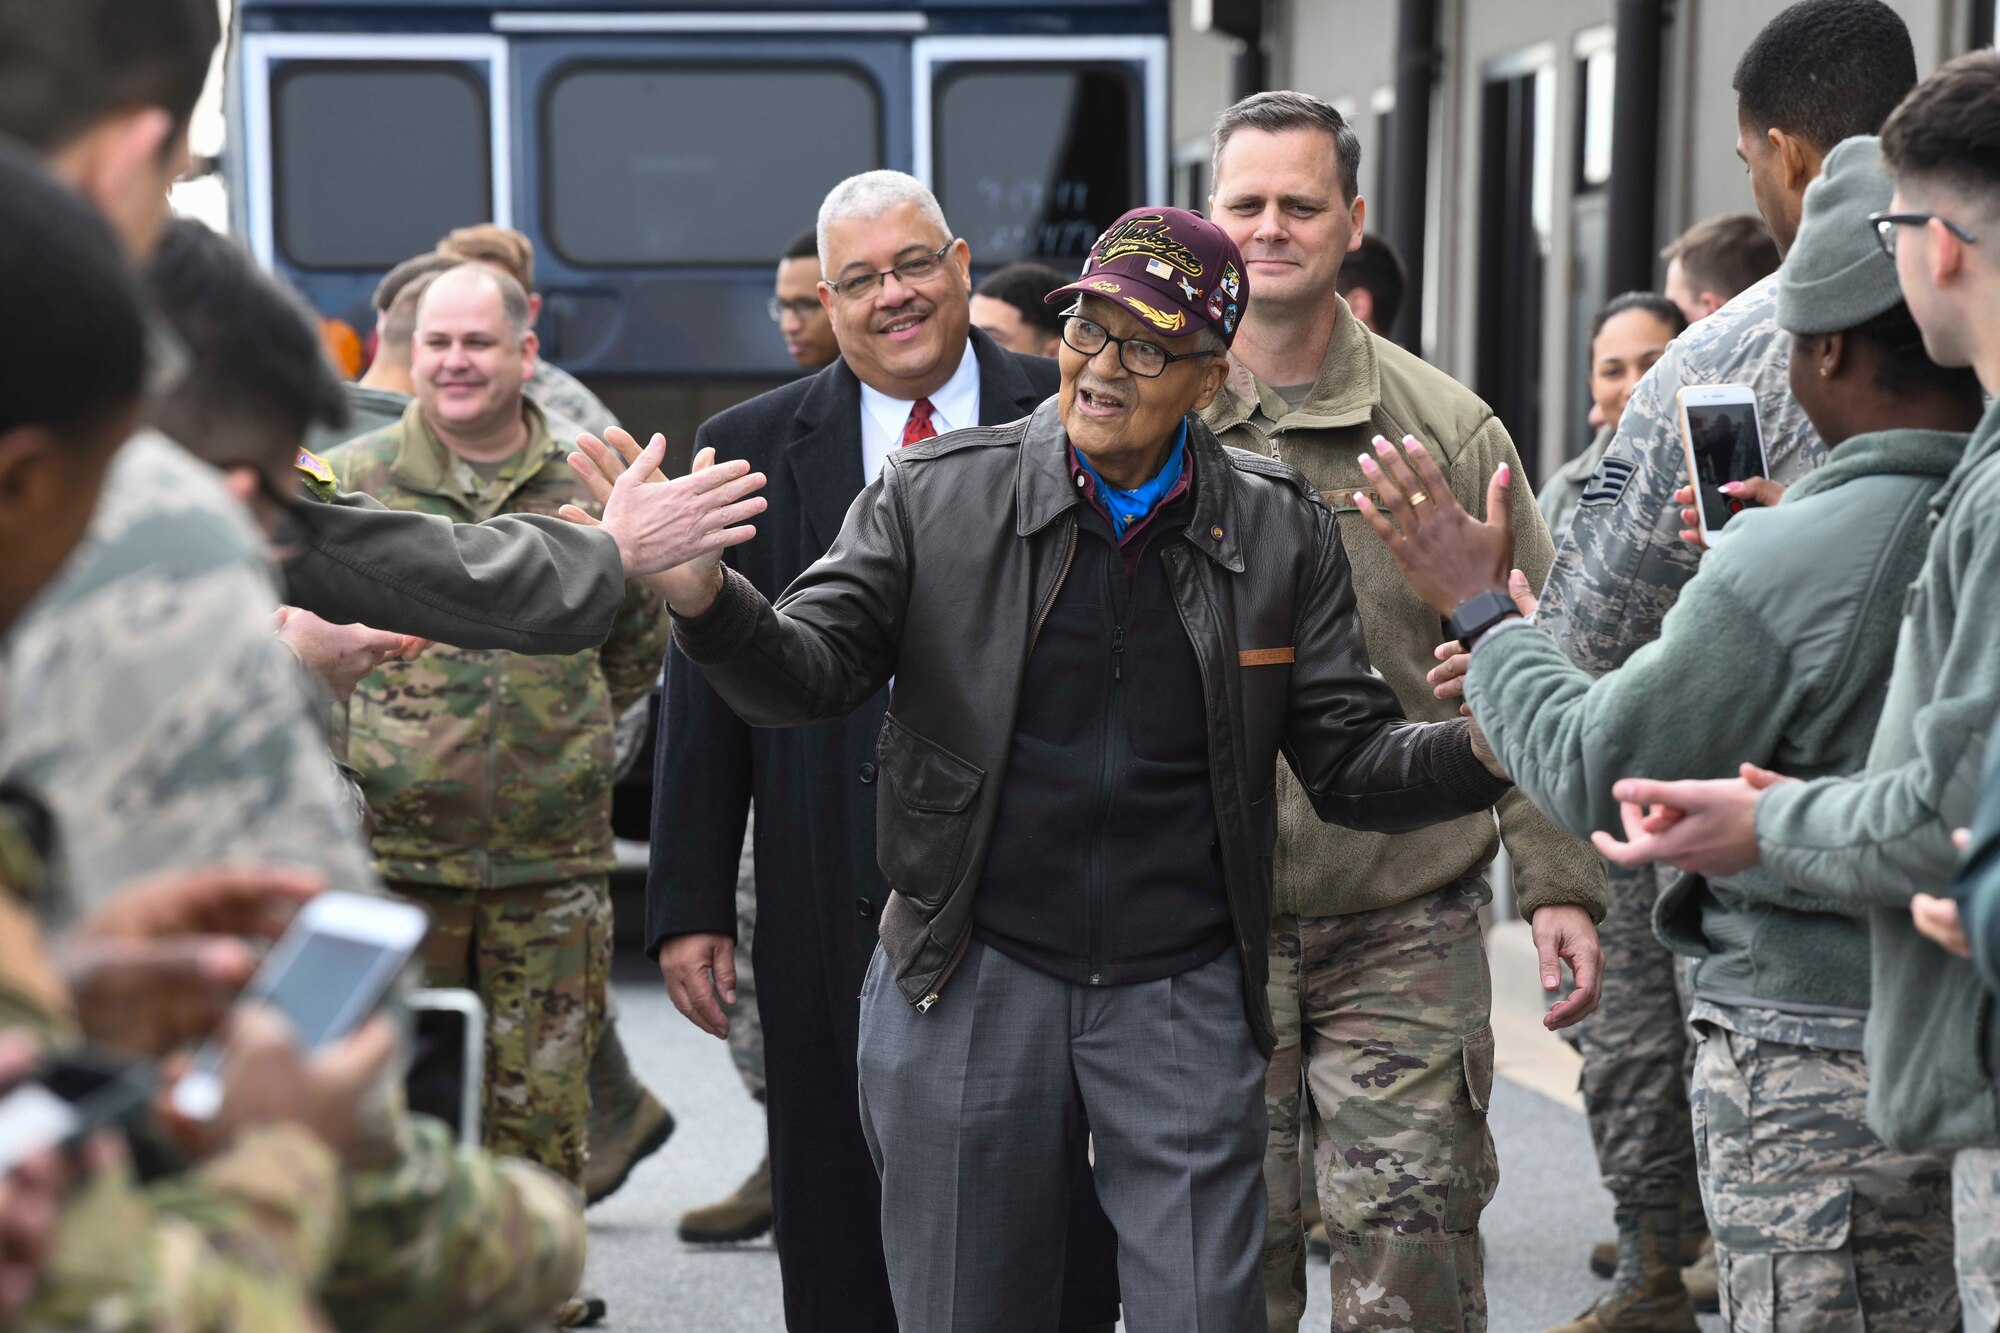 Retired Col. Charles McGee, one of the Tuskegee Airmen, high-fives Airmen during his visit Dec. 6, 2019, at Dover Air Force Base, Del. McGee served a total of 30 years in the U.S. Air Force, beginning with the U.S. Army Air Corps, and flew a total of 409 combat missions in World War II, the Korean War and the Vietnam War. The Tuskegee Airmen were the first African-American military aviators in the U.S. Army Air Corps. (U.S. Air Force photo by Senior Airman Christopher Quail)